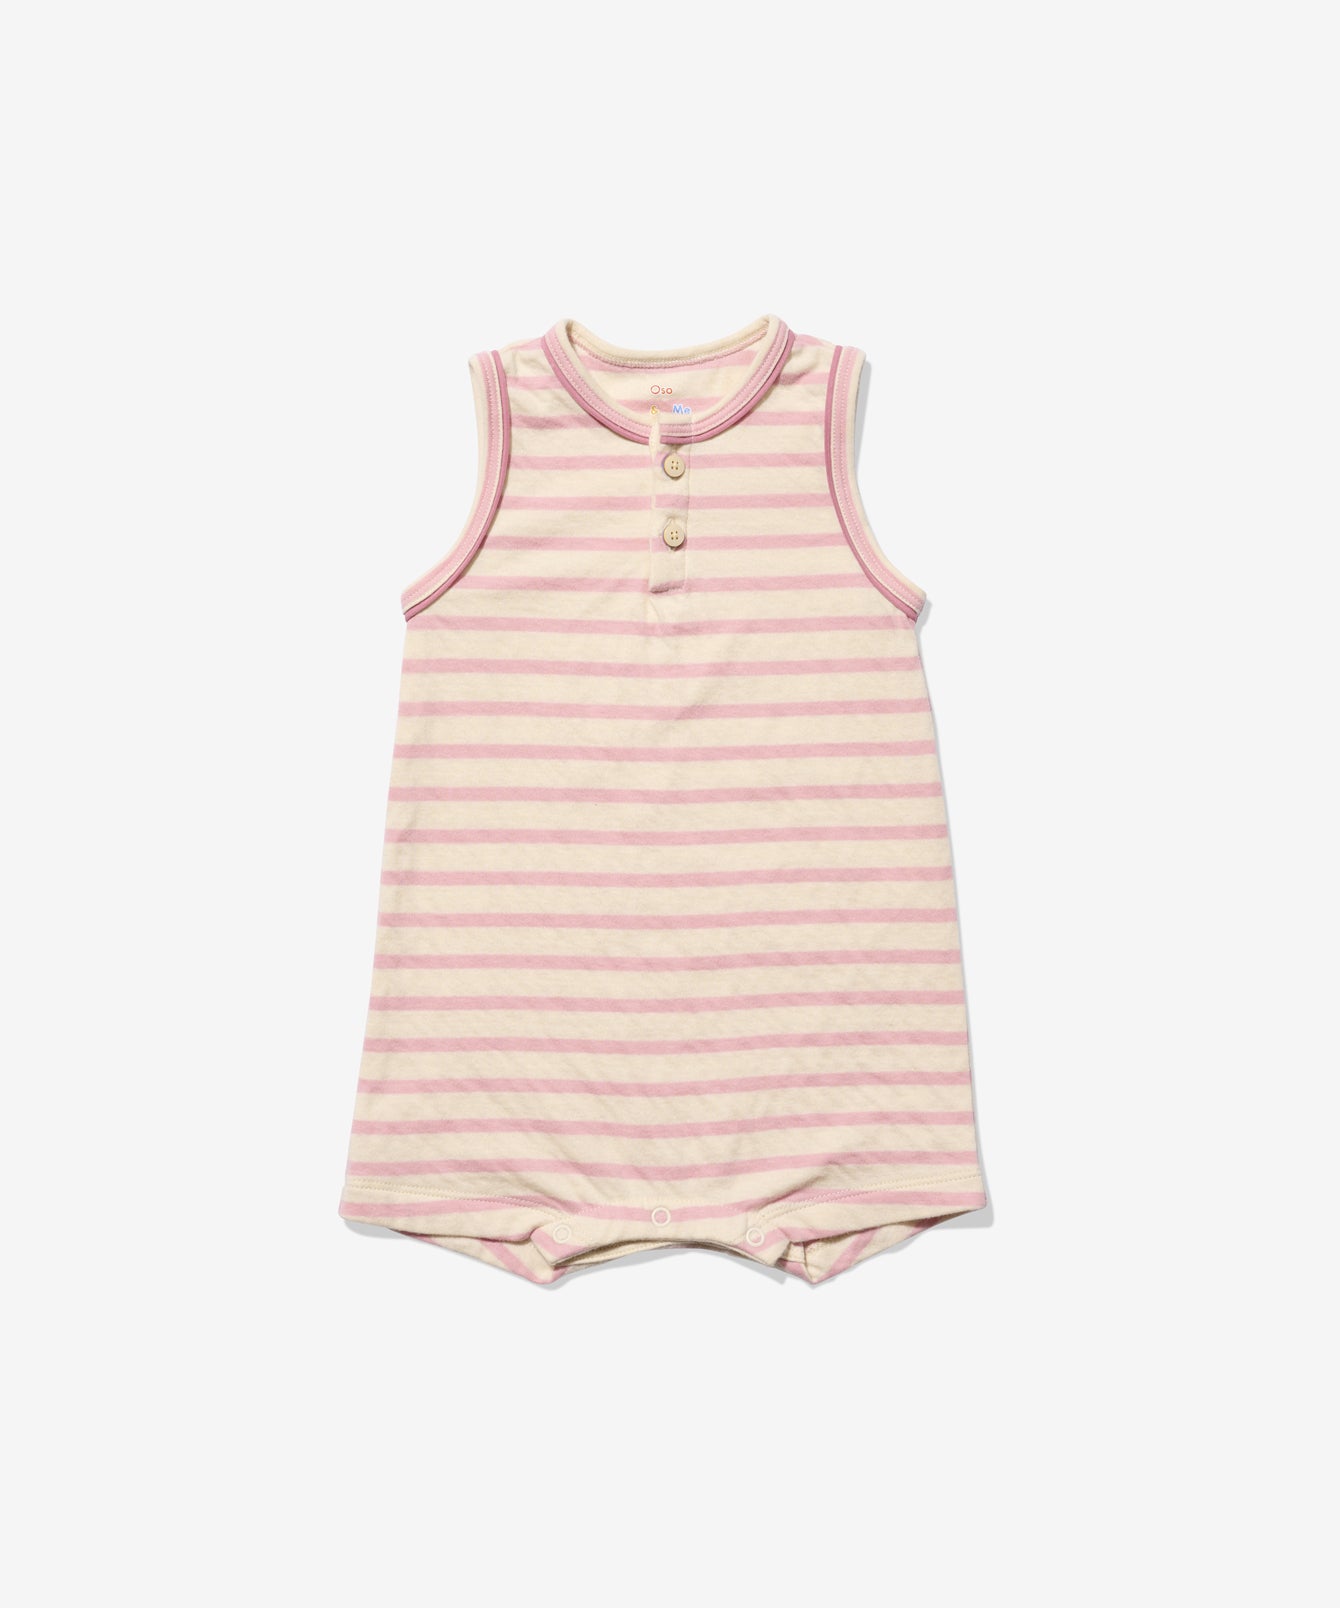 Baby Girl One-piece Romper | Oso And Me